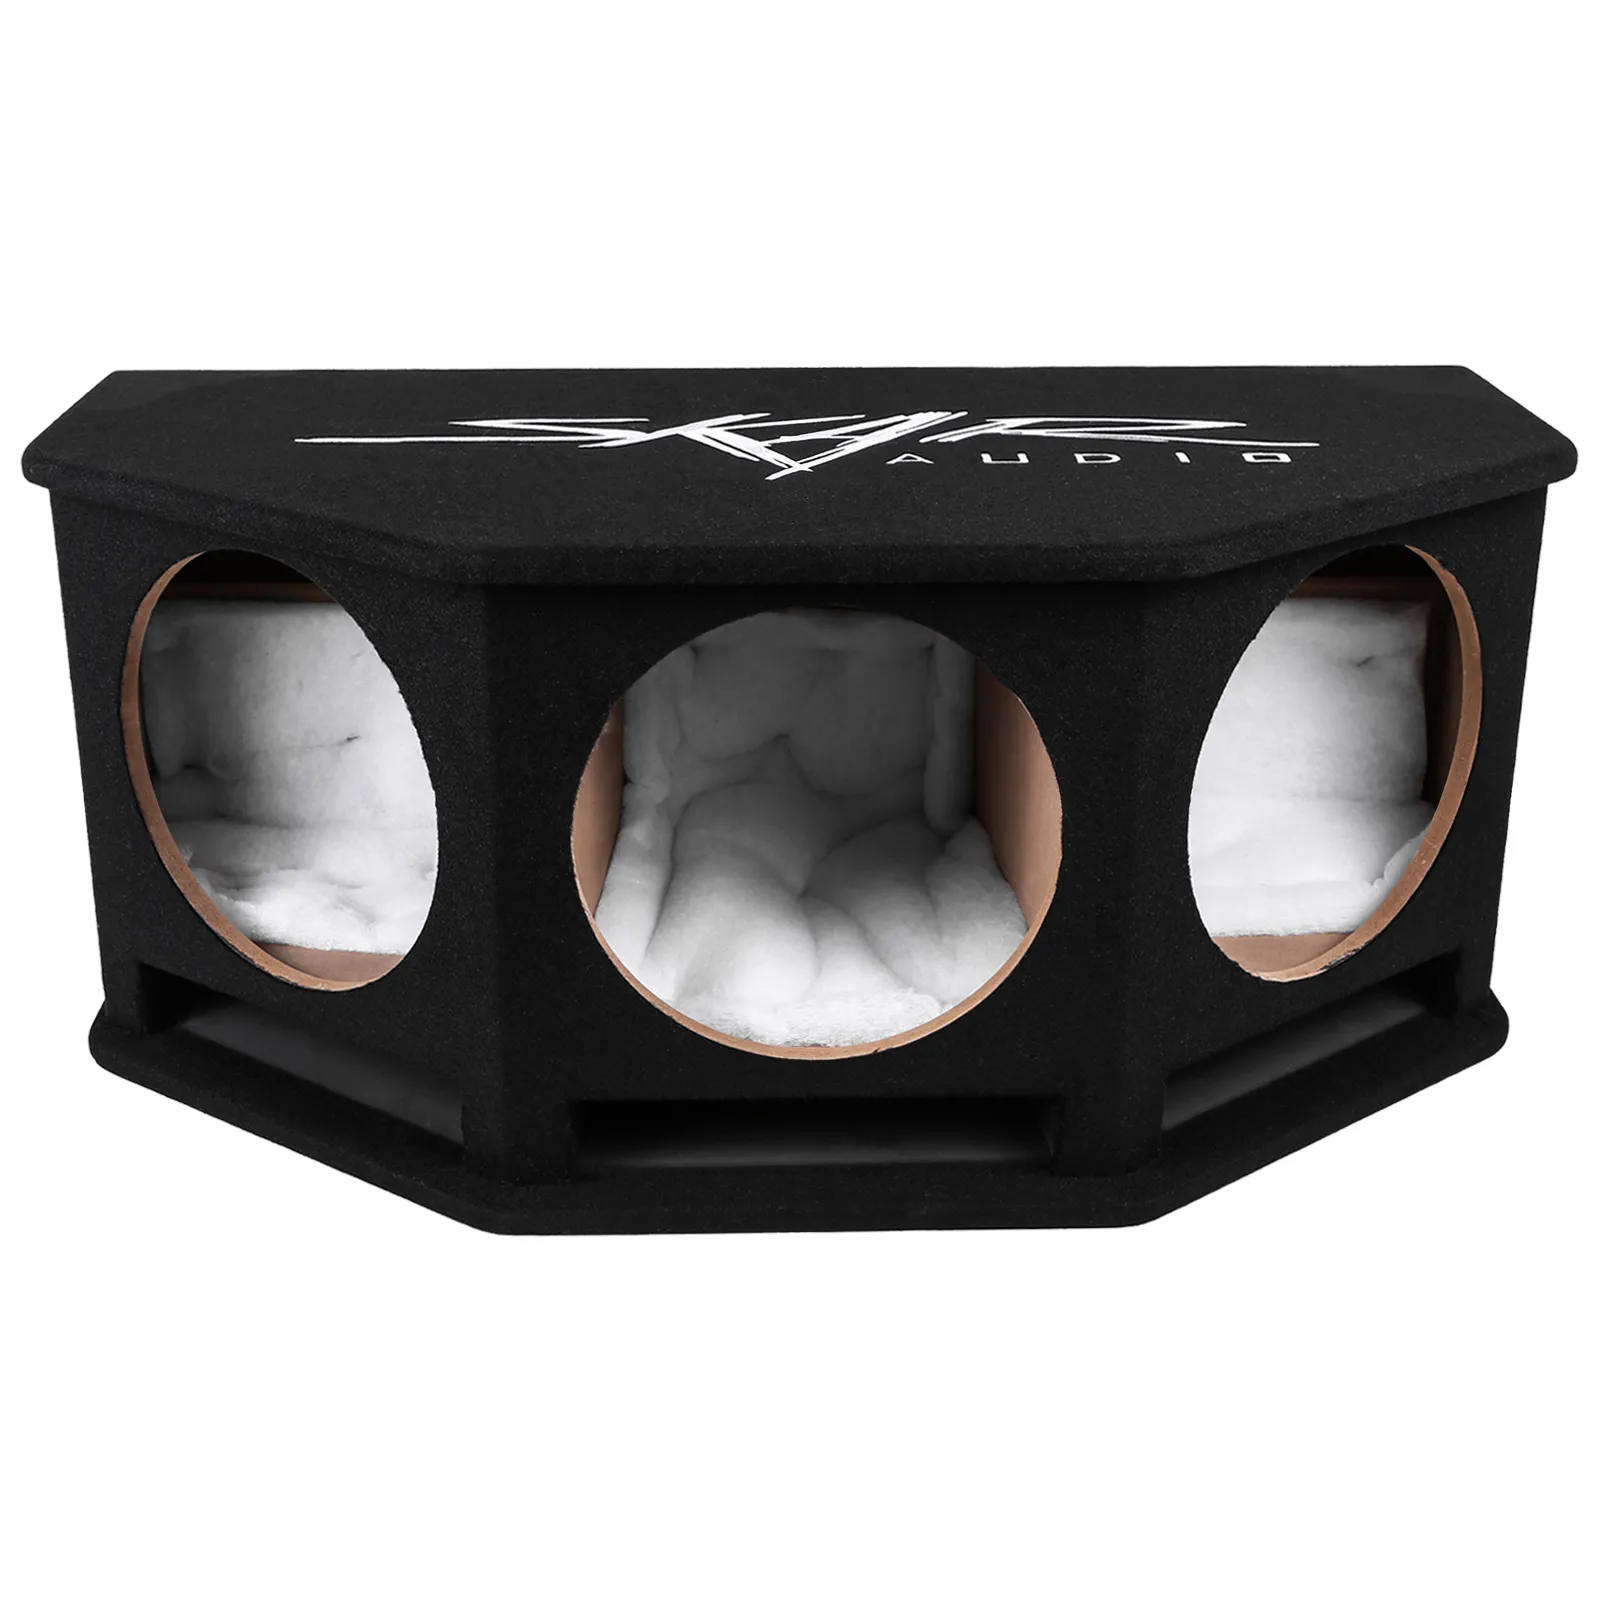 Featured Product Photo 1 for Triple 12" Ported Universal Fit Subwoofer Box